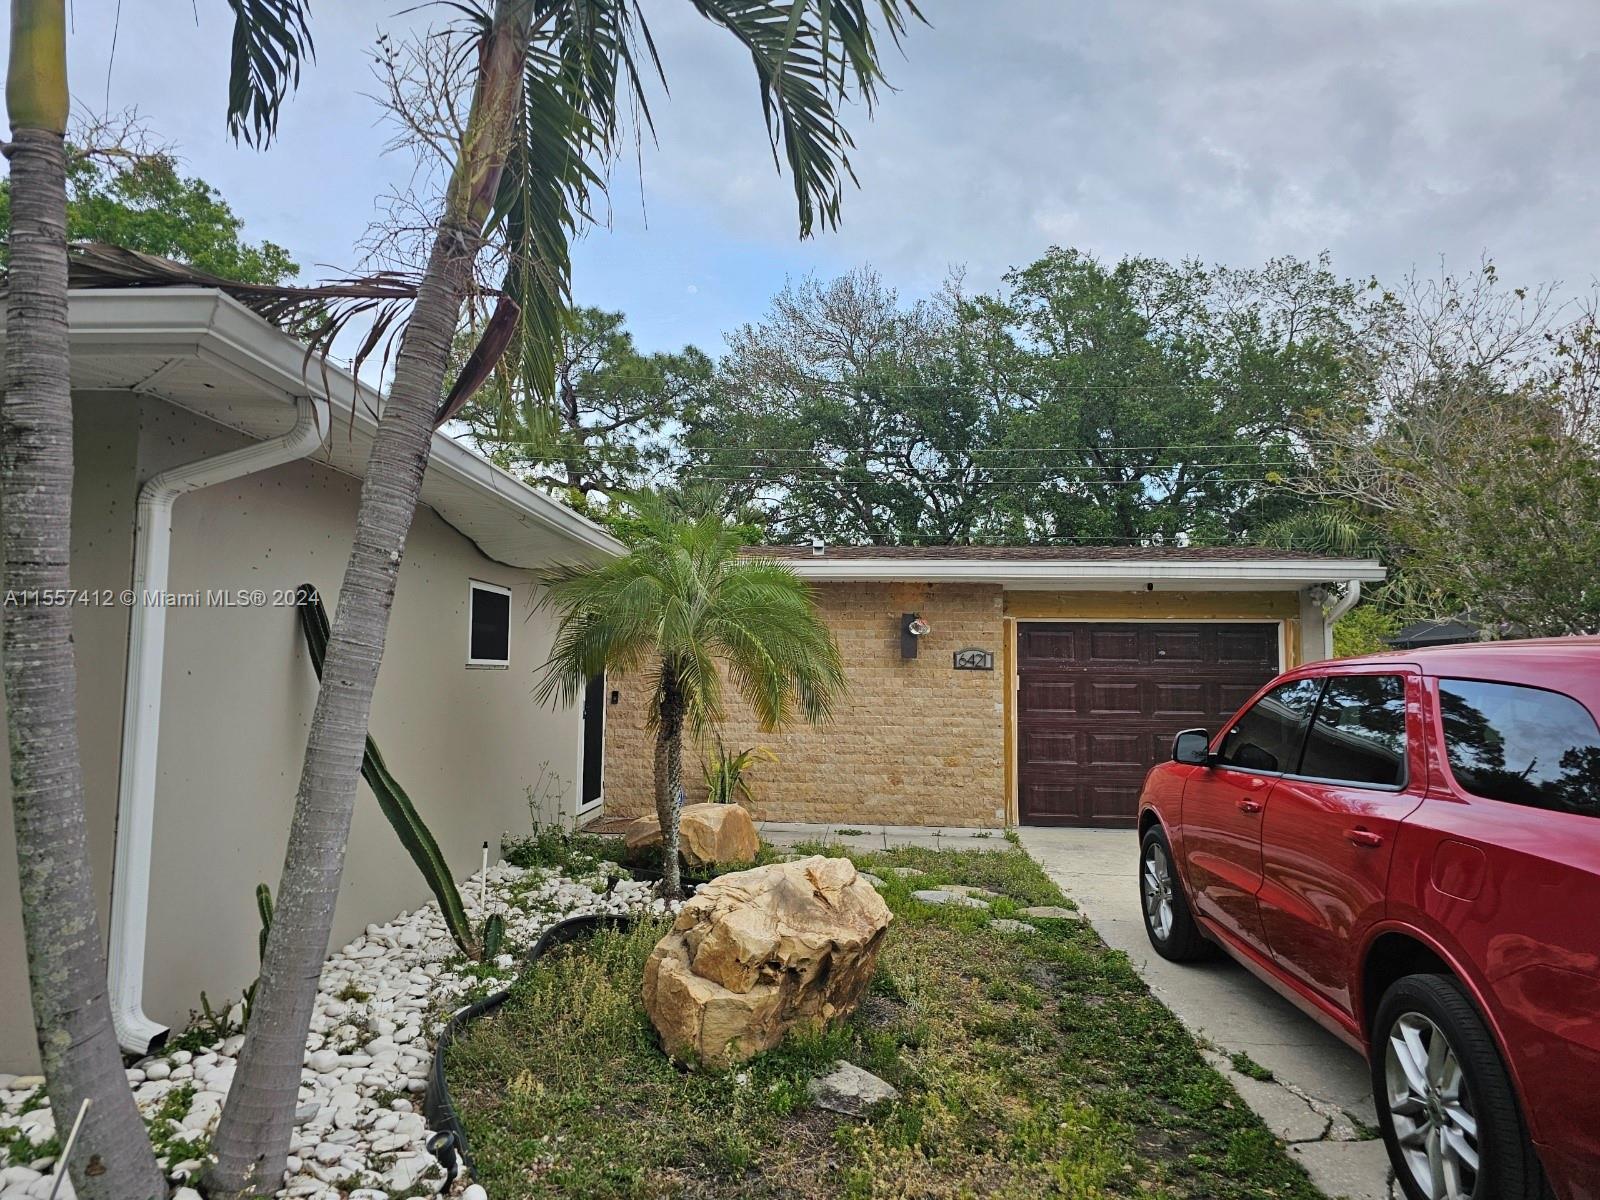 Photo of 6421 Murray Hill Dr in Tampa, FL